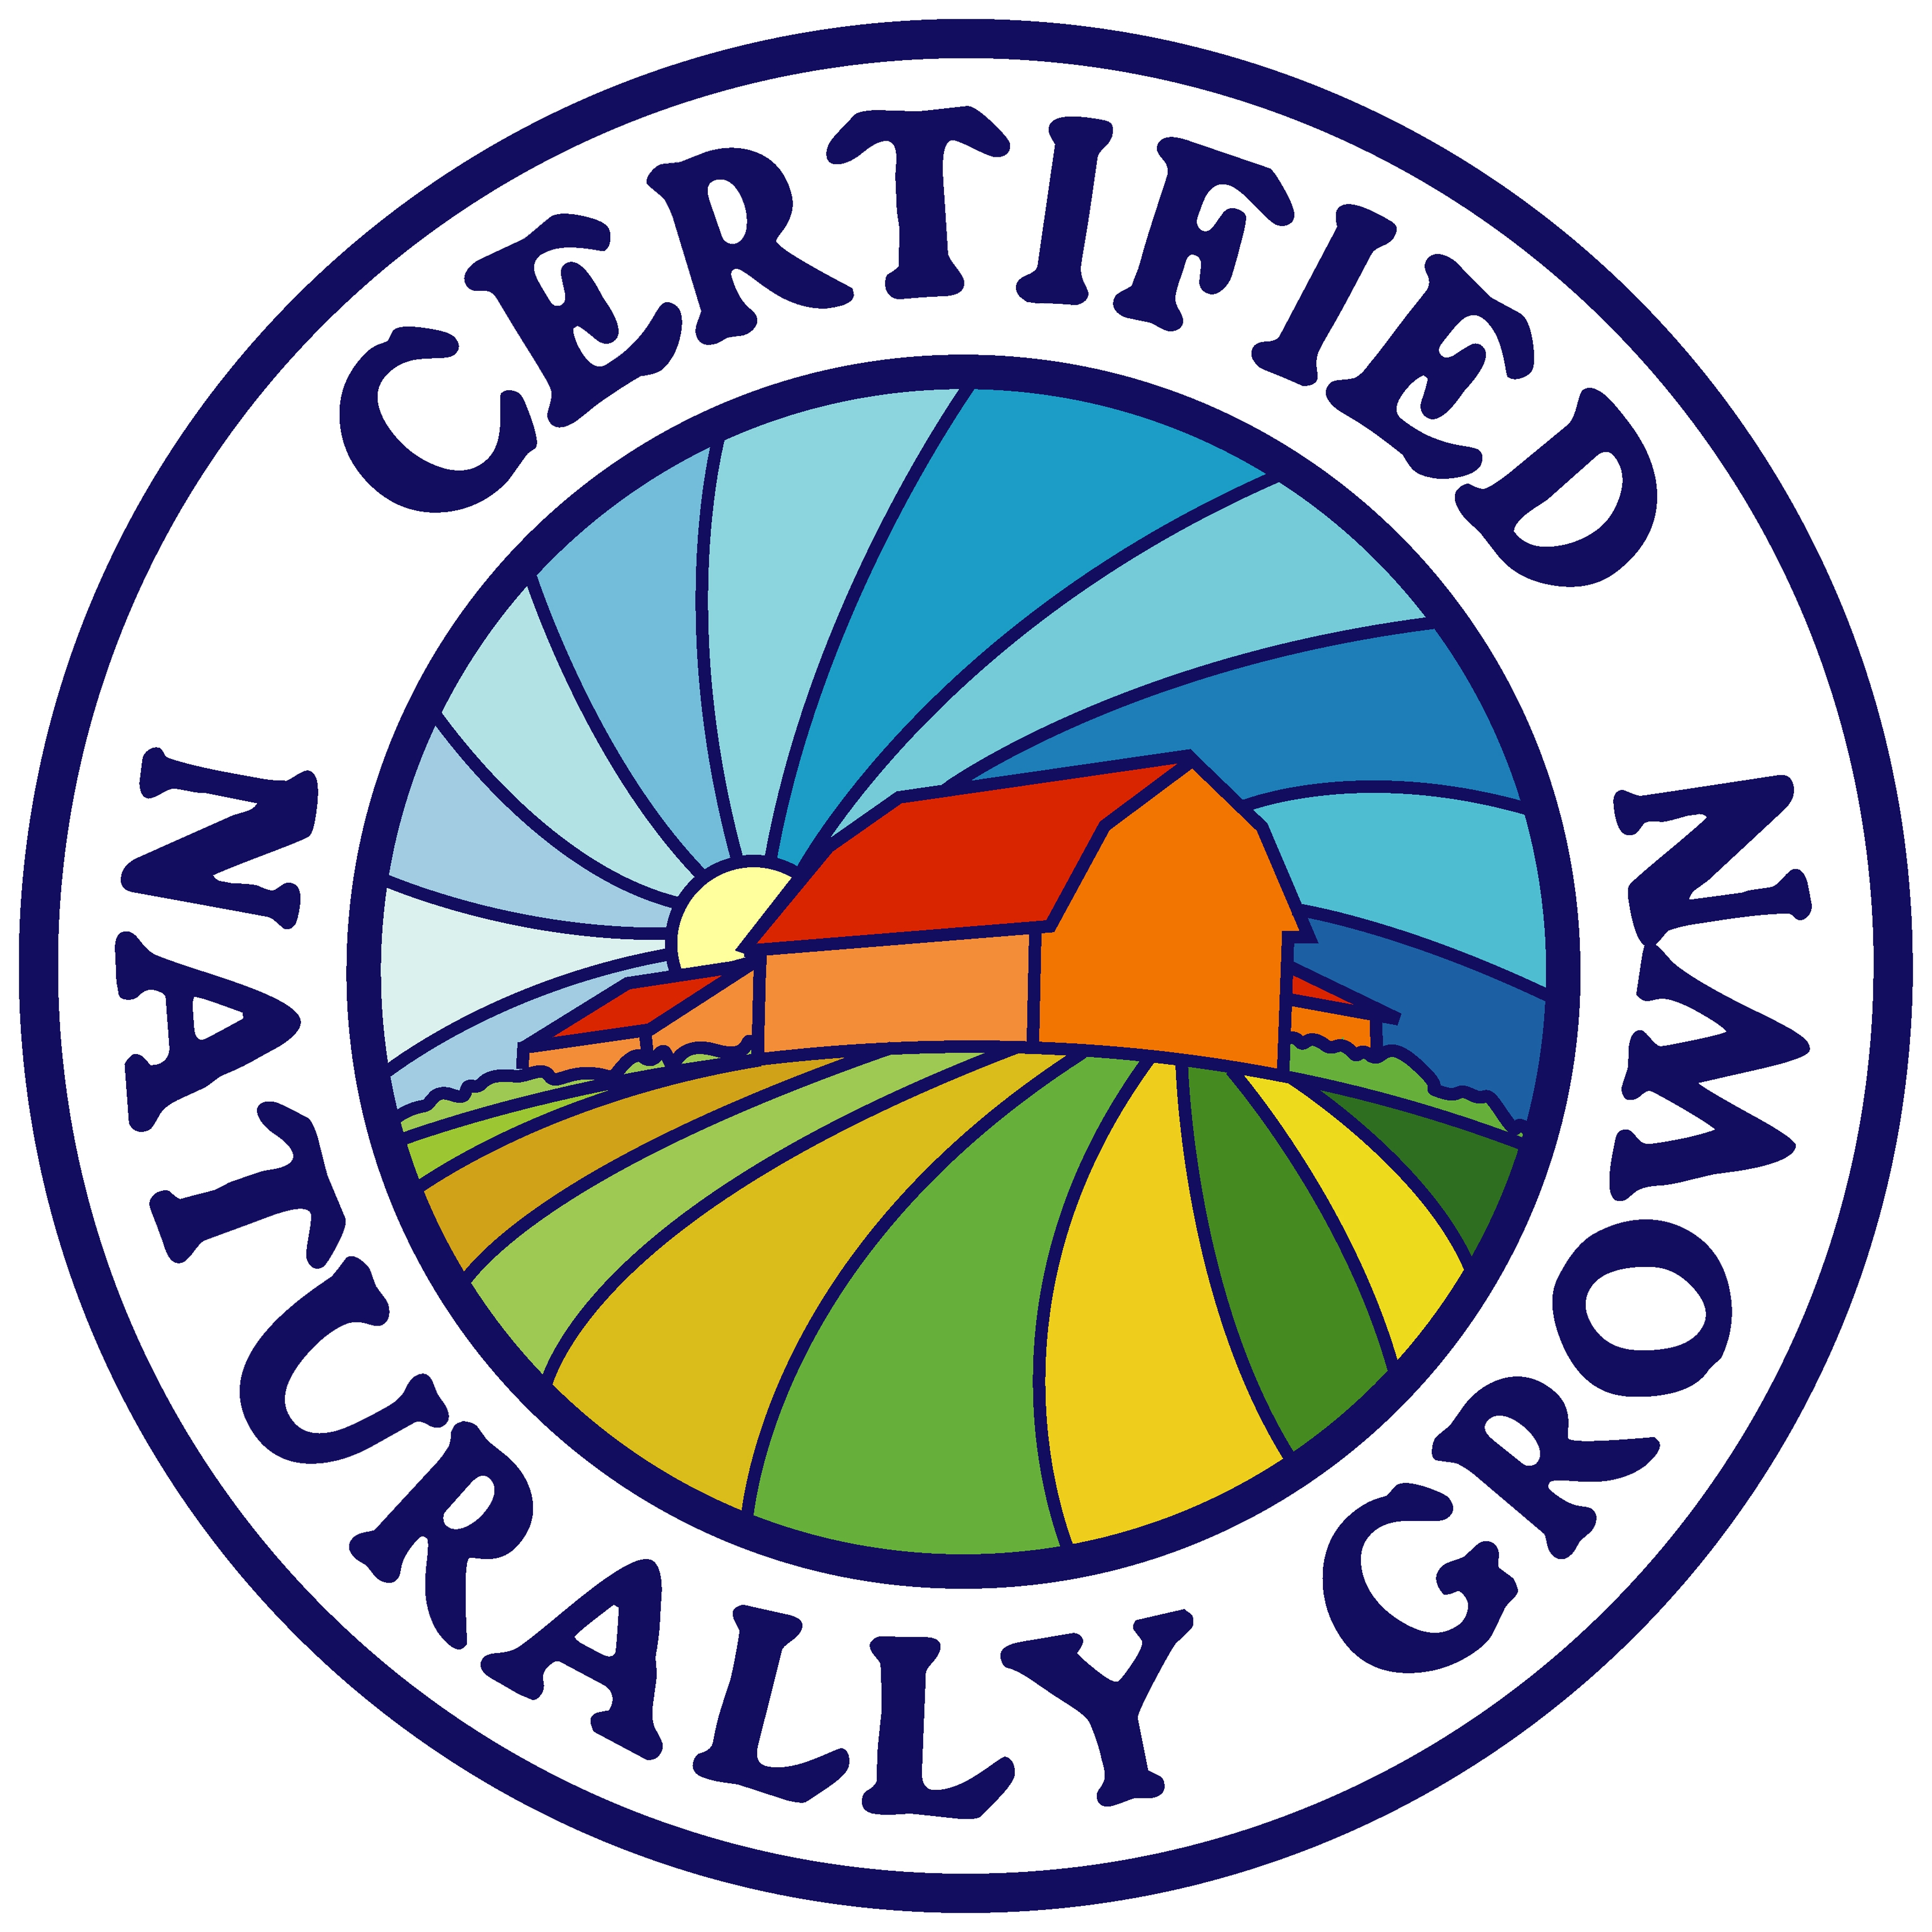 Certified Natural Grown Produce logo, indicative of the quality of the crops sold by Crated Earth Farm